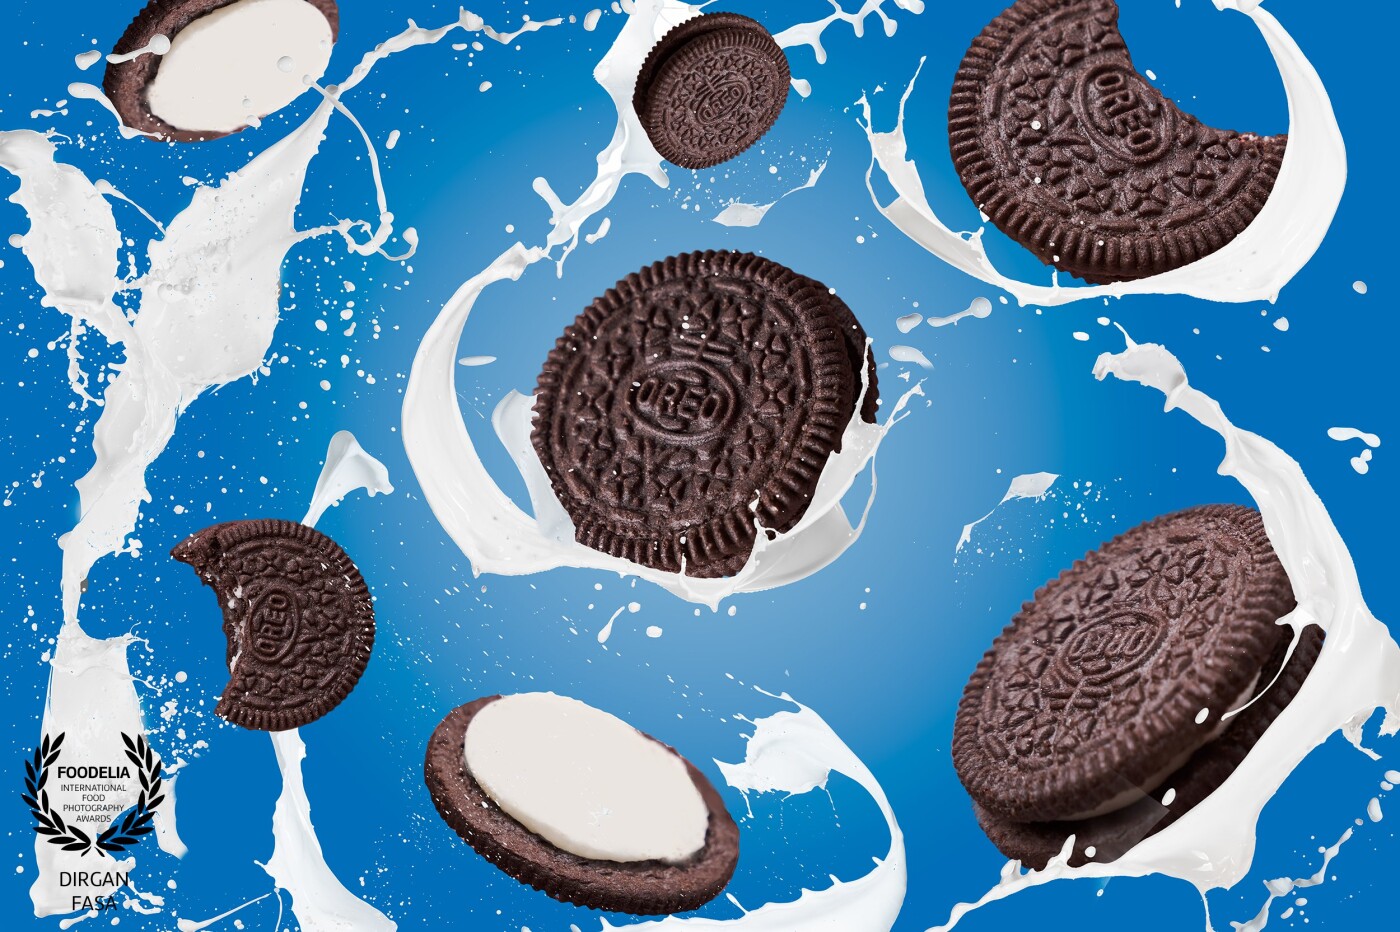 Sometimes, the mess turns to be a great thing. The messy concept was to create a different advertising look for Cookies Cream products. This is a part of my personal project: Made the snacks great again.